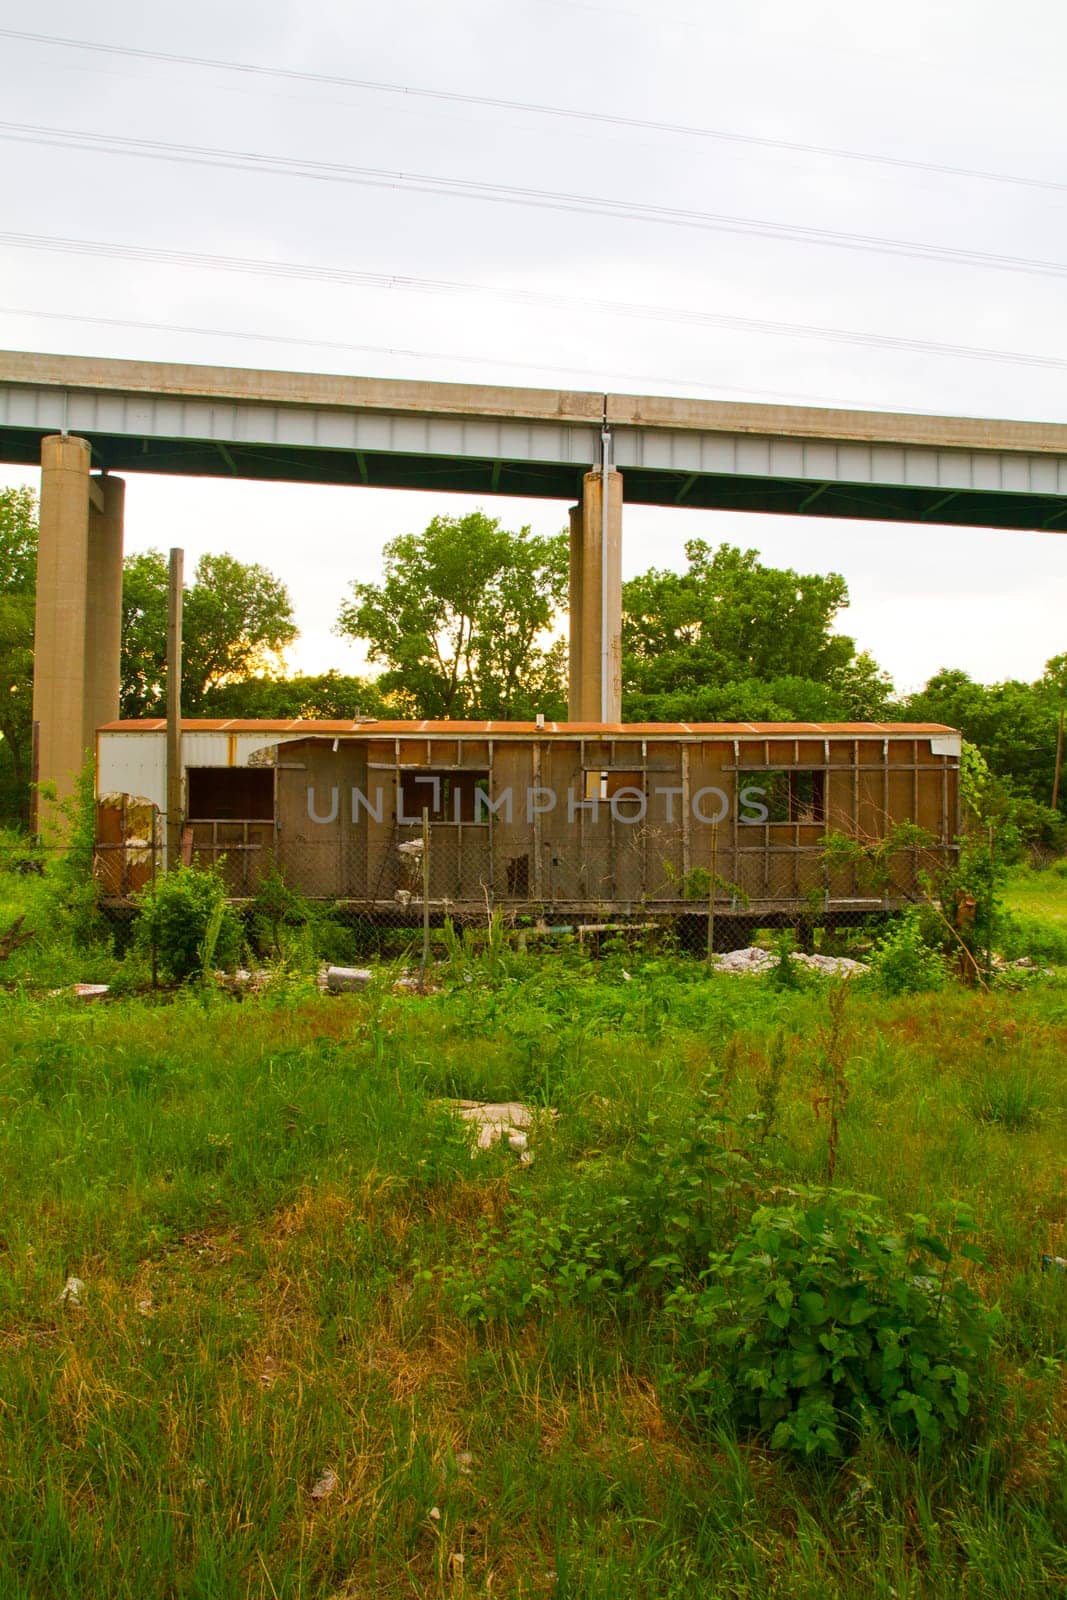 Sunset Over Abandoned Urban Building in Illinois with Overgrown Vegetation and Bridge View by njproductions